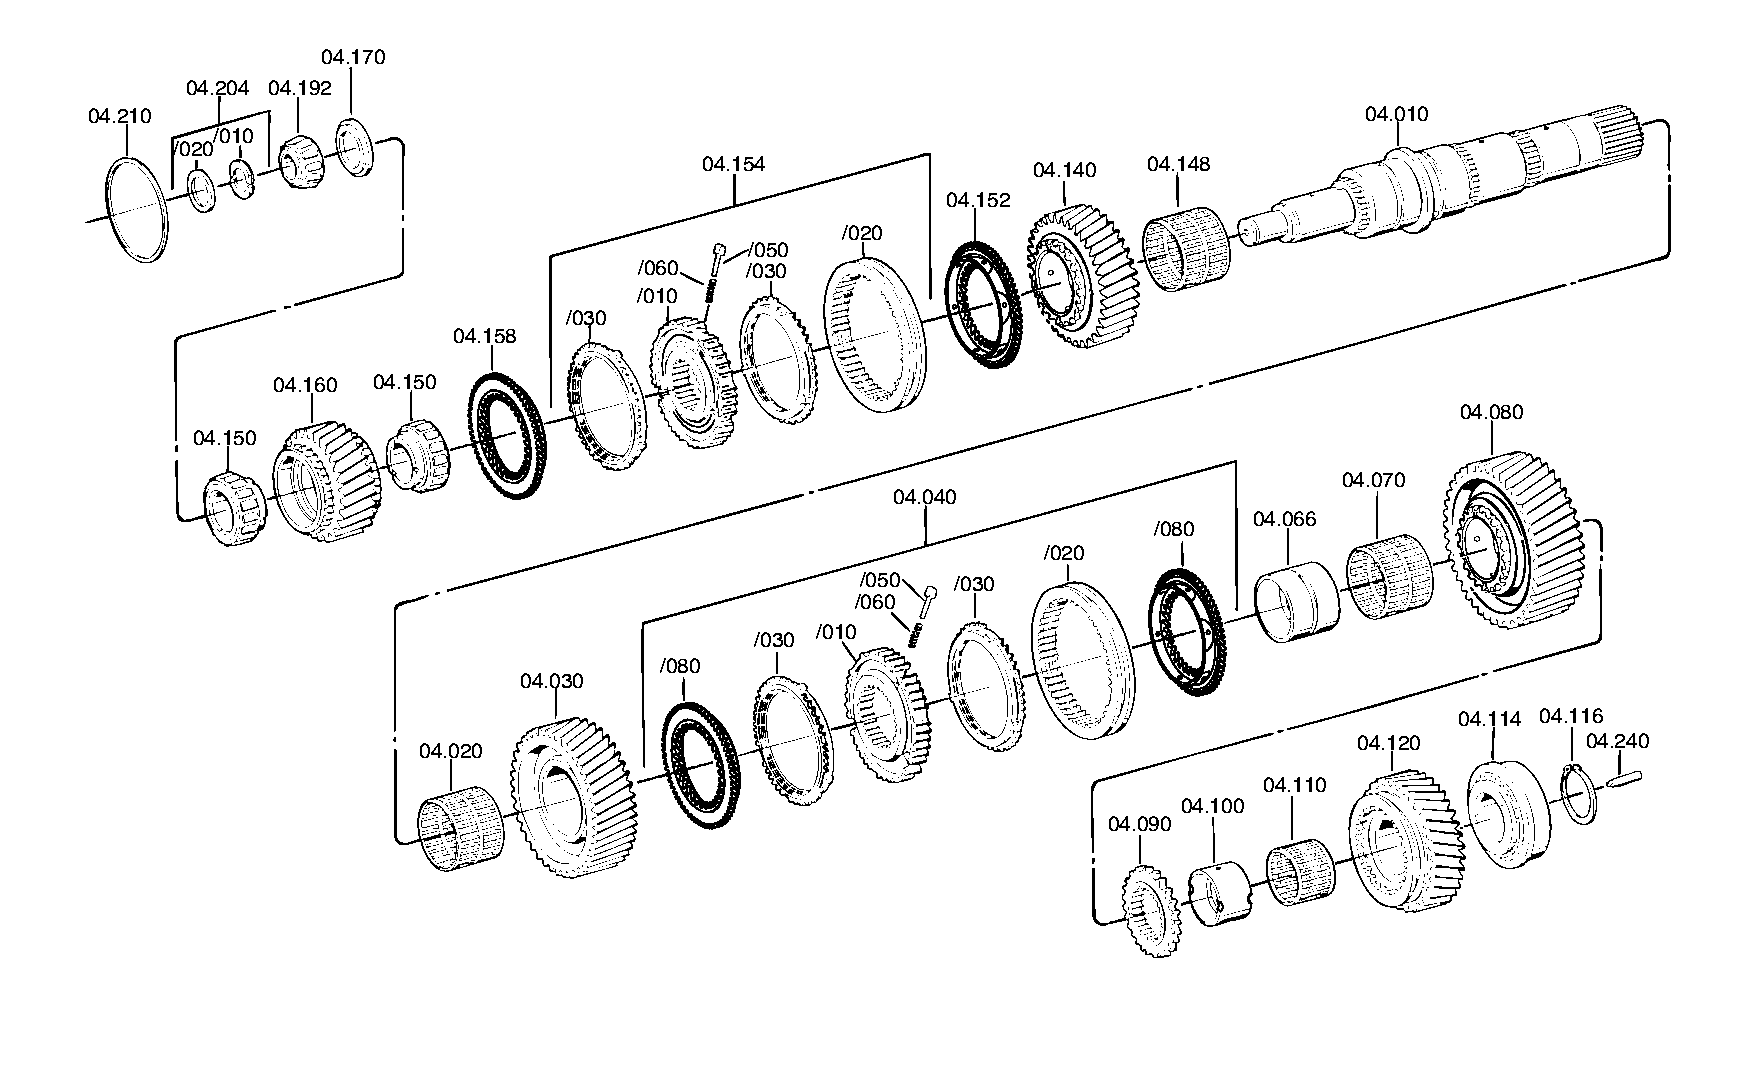 drawing for Astra Veicoli Industriali 113722 - CYLINDER ROLLER BEARING (figure 2)